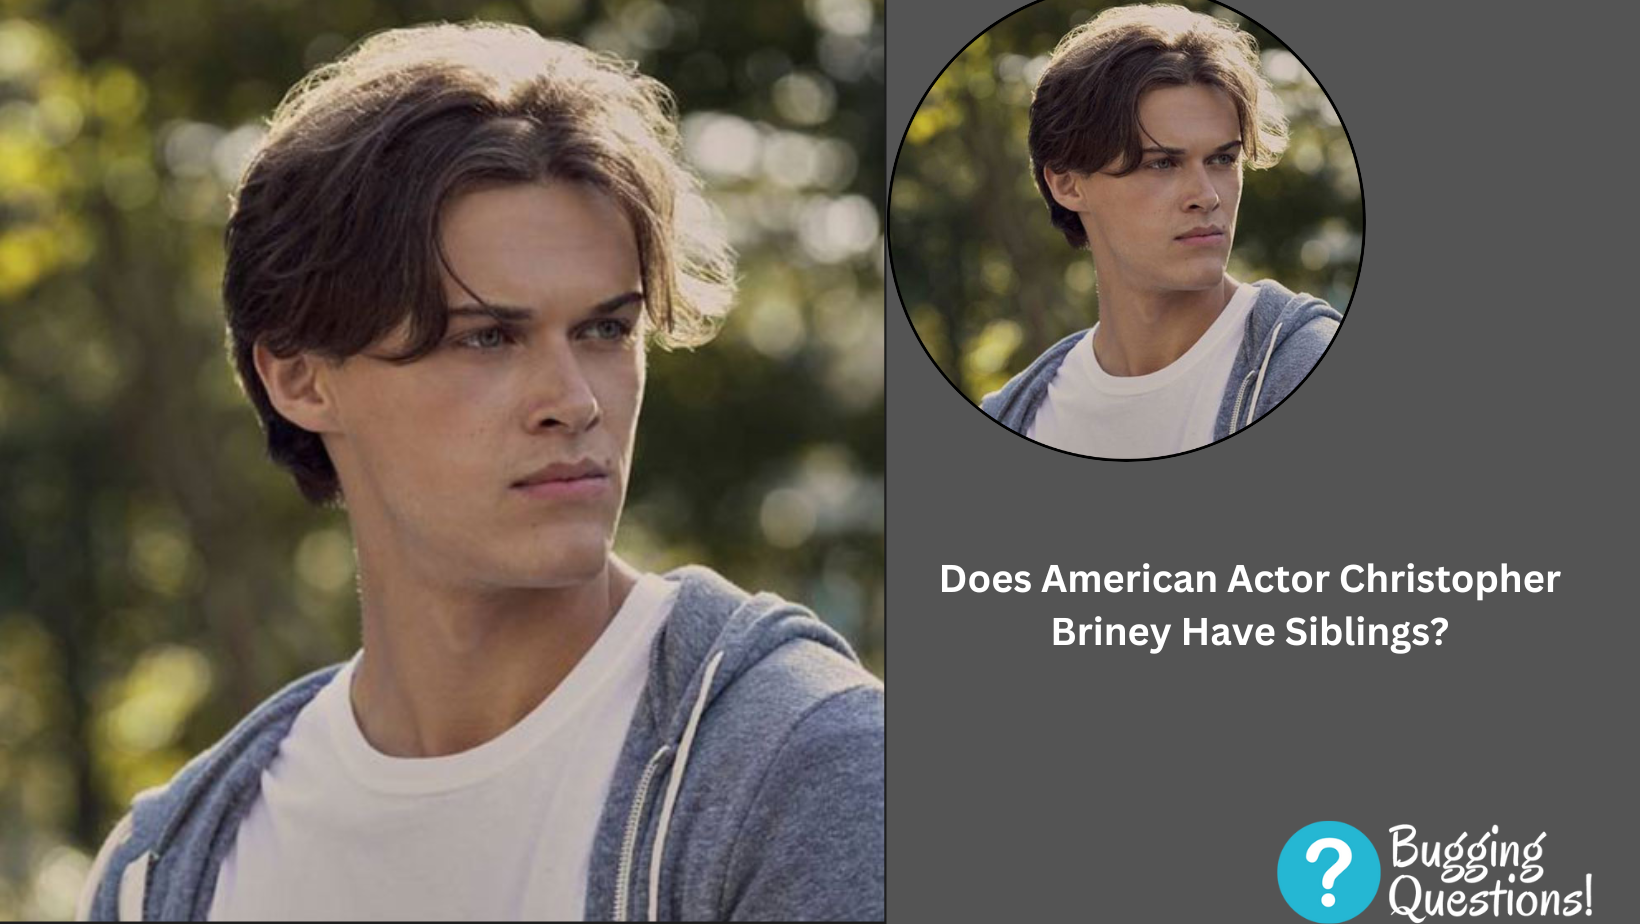 Does American Actor Christopher Briney Have Siblings?